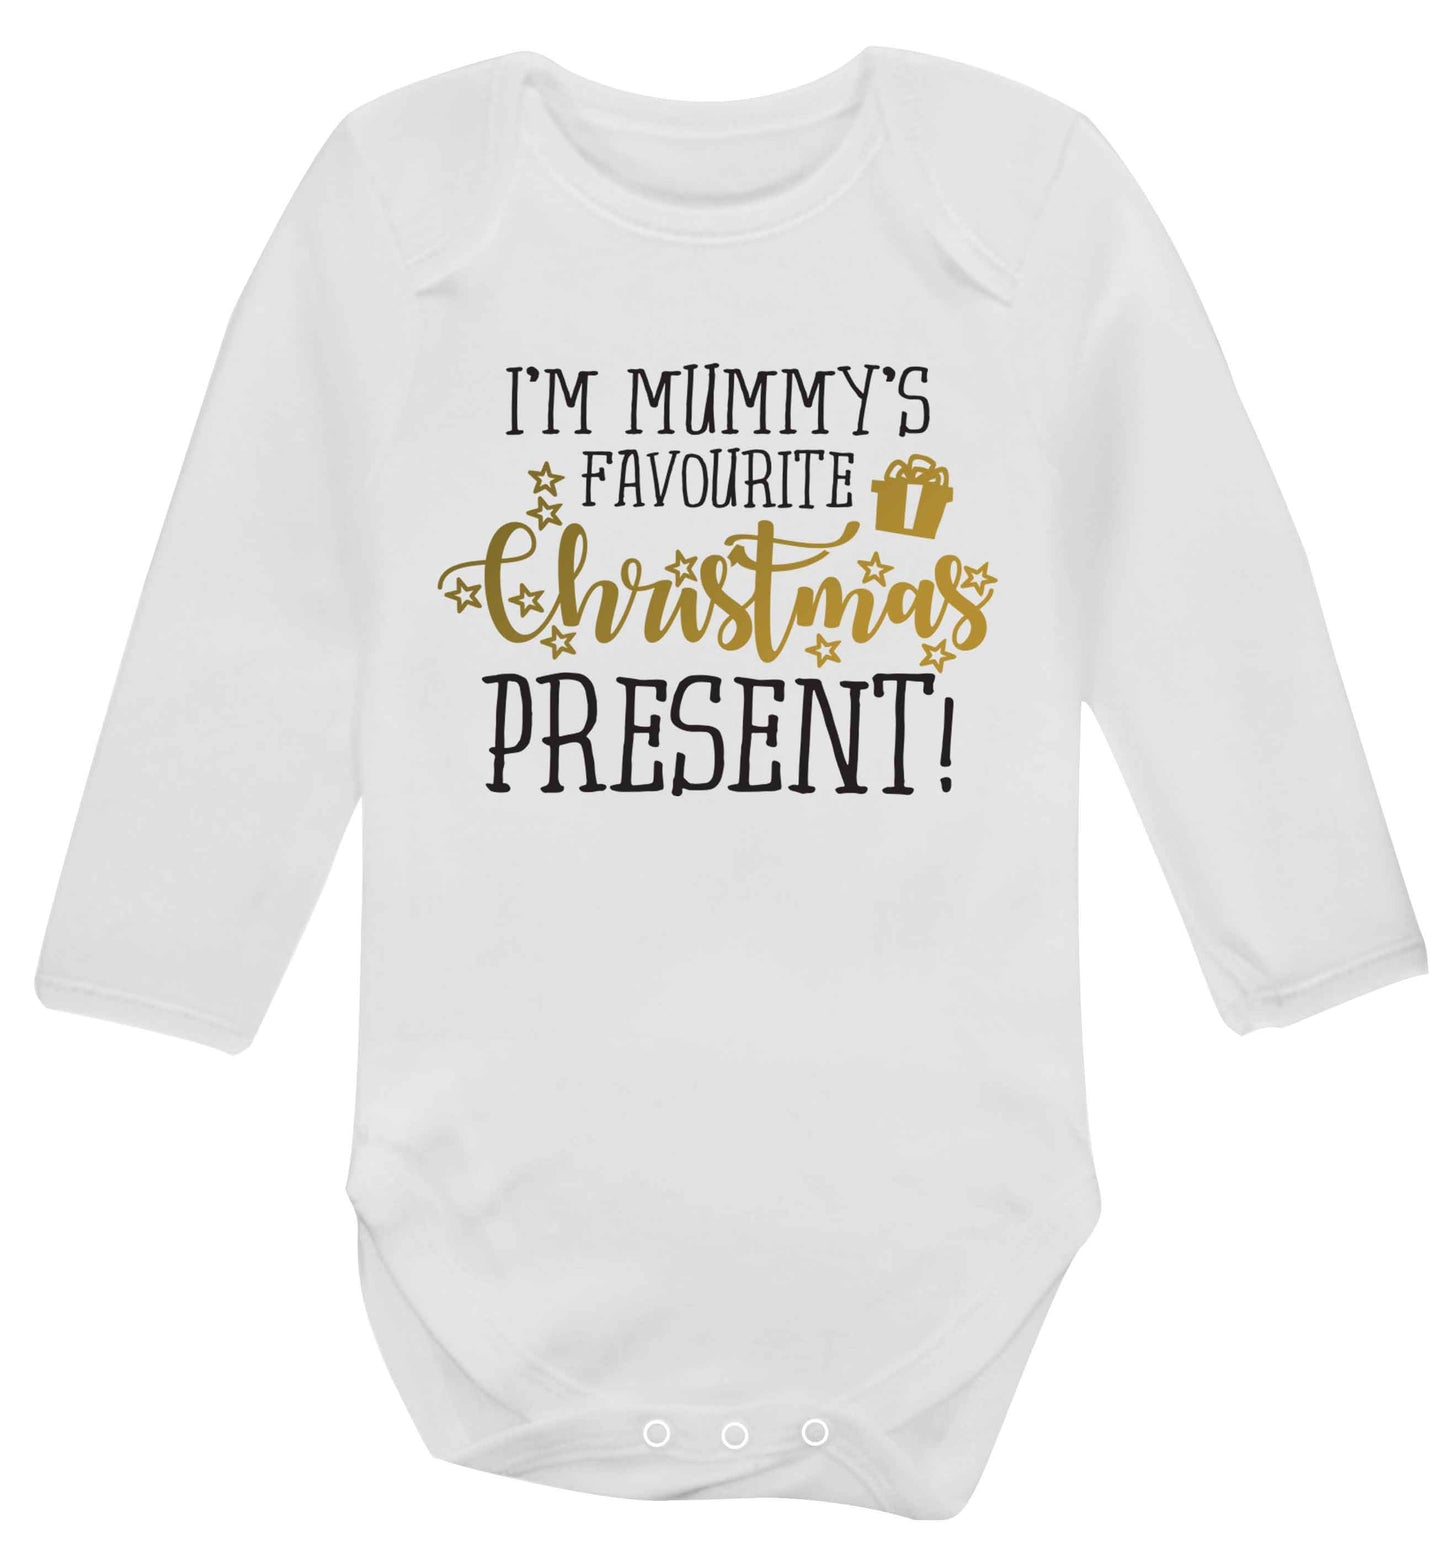 I'm Mummy's favourite Christmas present Baby Vest long sleeved white 6-12 months